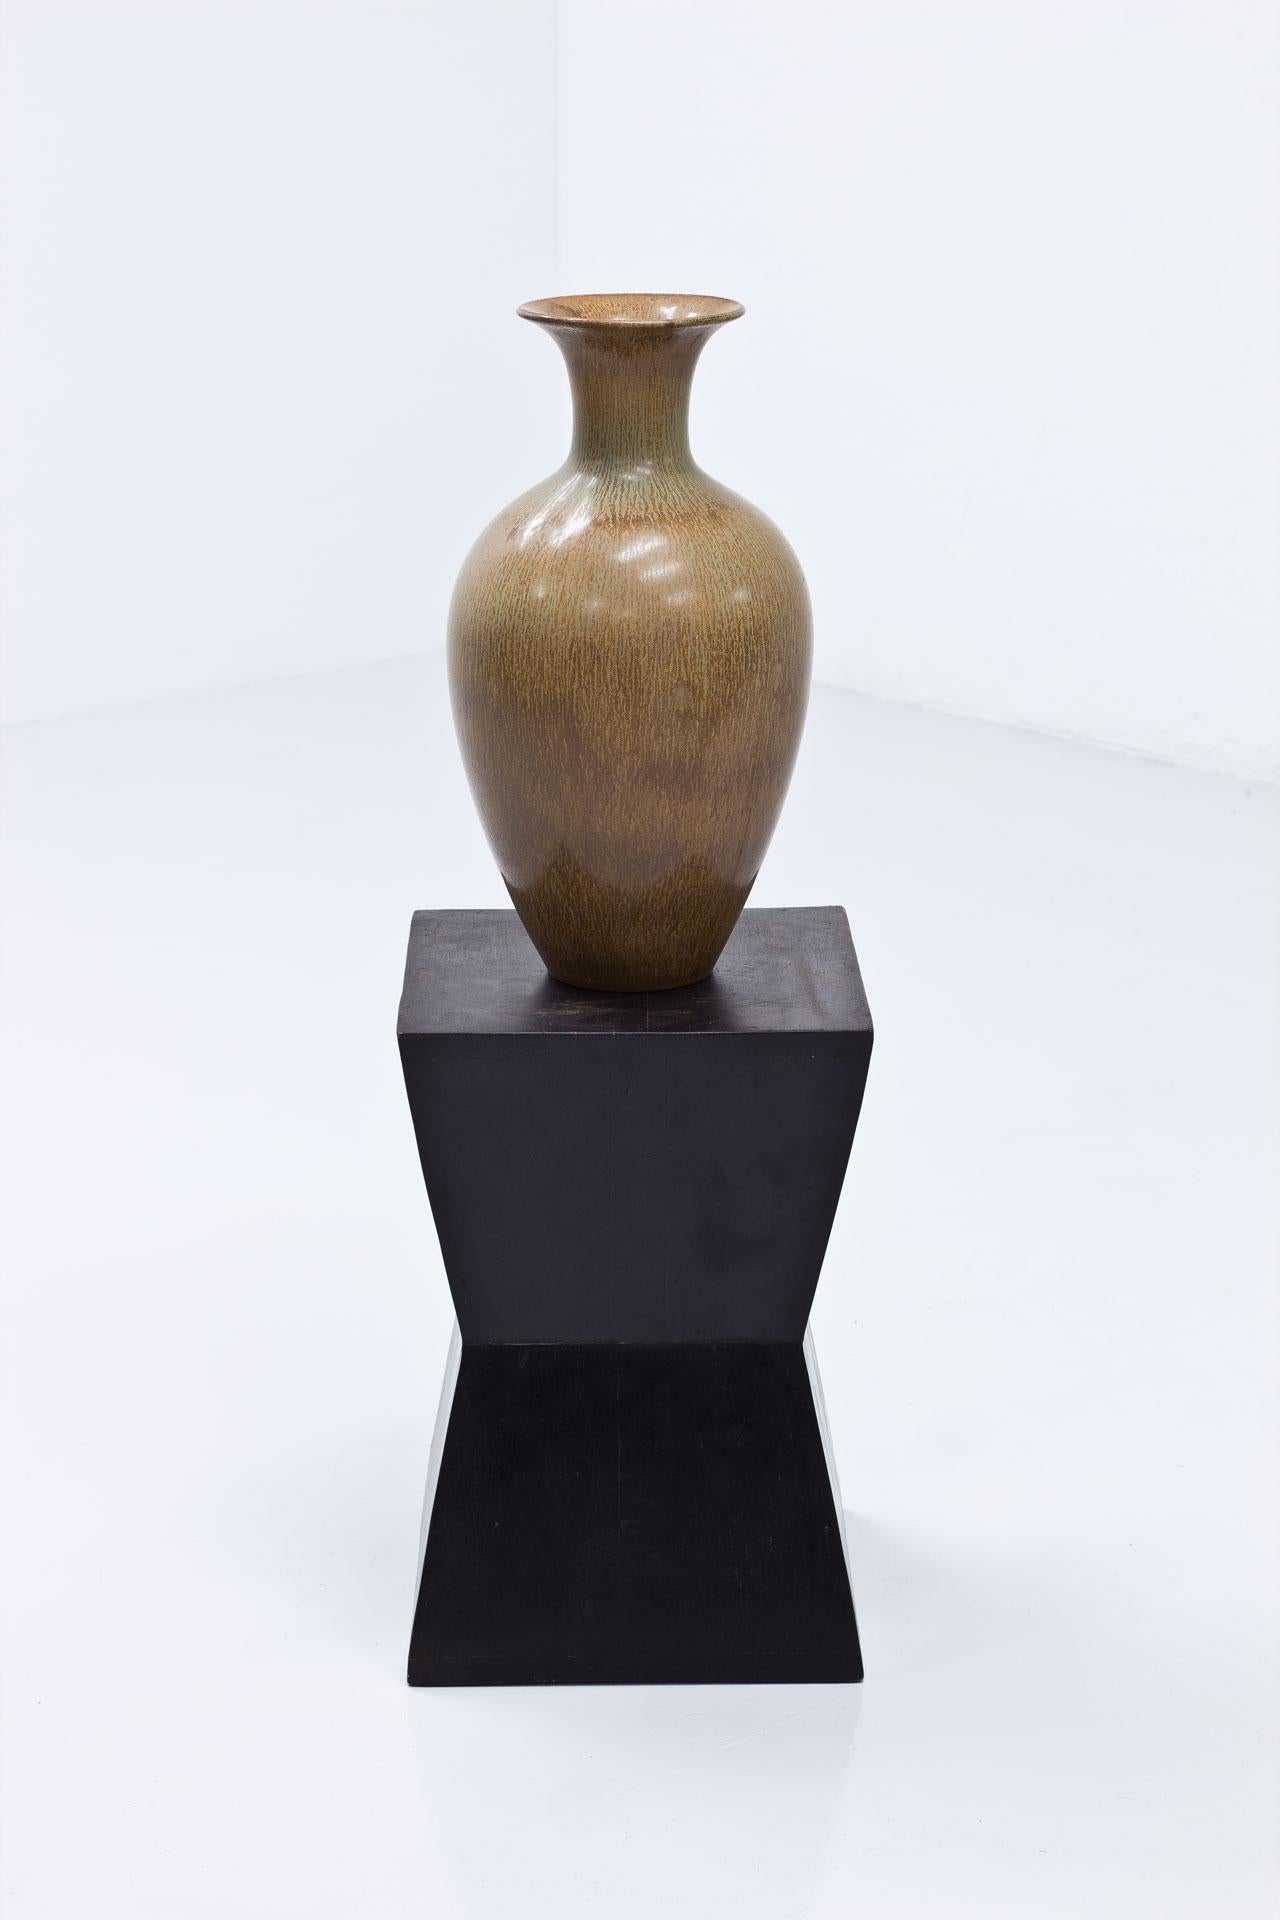 Stoneware floor vase designed by
Gunnar Nylund. Manufactured by
Rörstrand, Sweden during the 1950s.
Hare fur glaze in light brown and green.